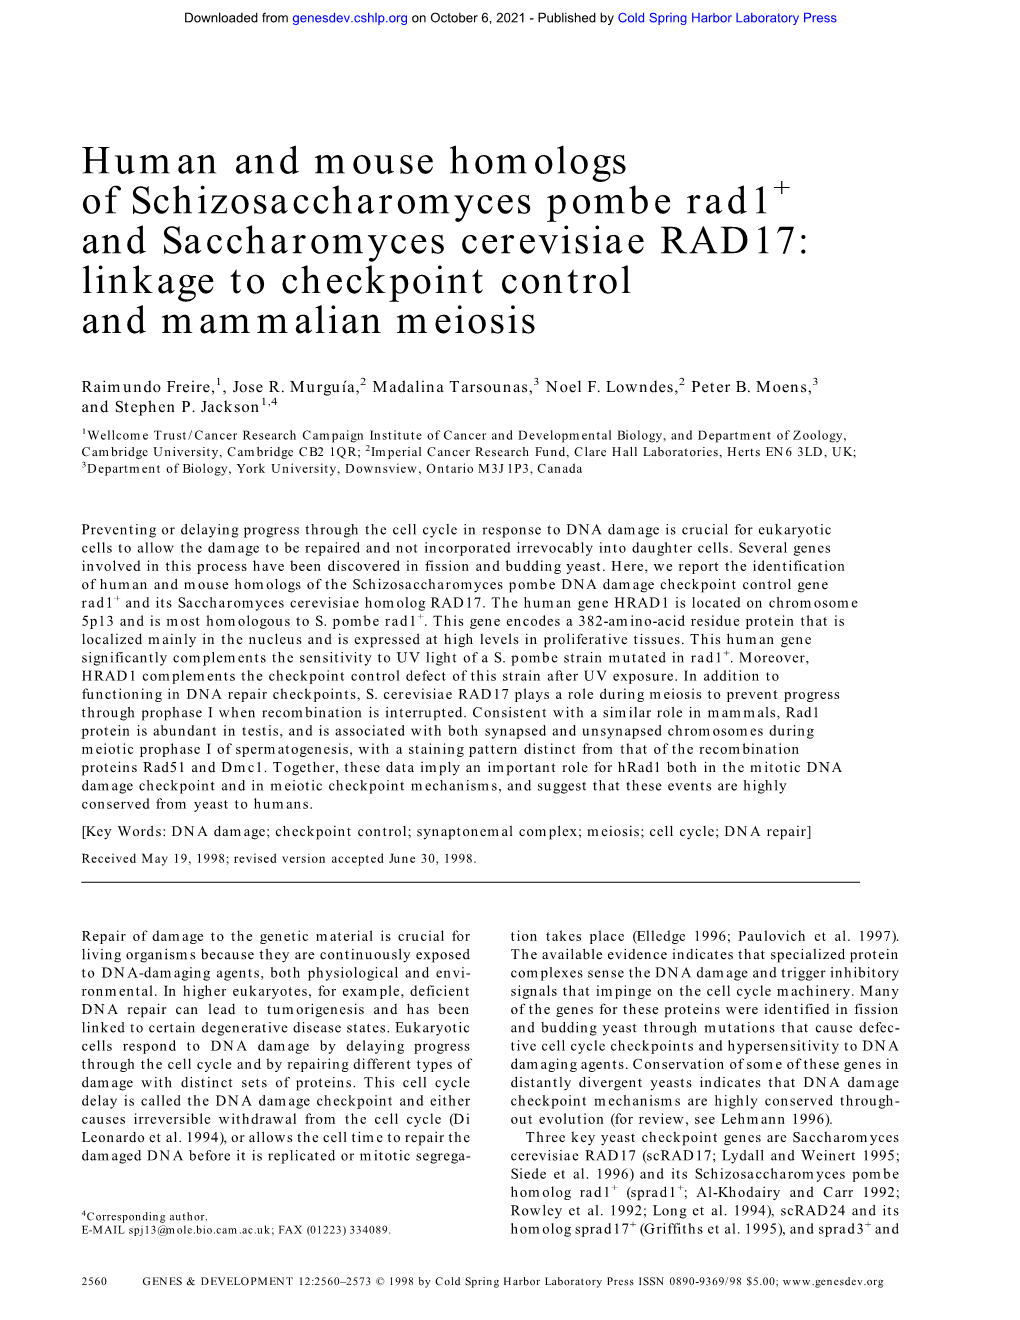 Human and Mouse Homologs of Schizosaccharomyces Pombe Rad1+ and Saccharomyces Cerevisiae RAD17: Linkage to Checkpoint Control and Mammalian Meiosis